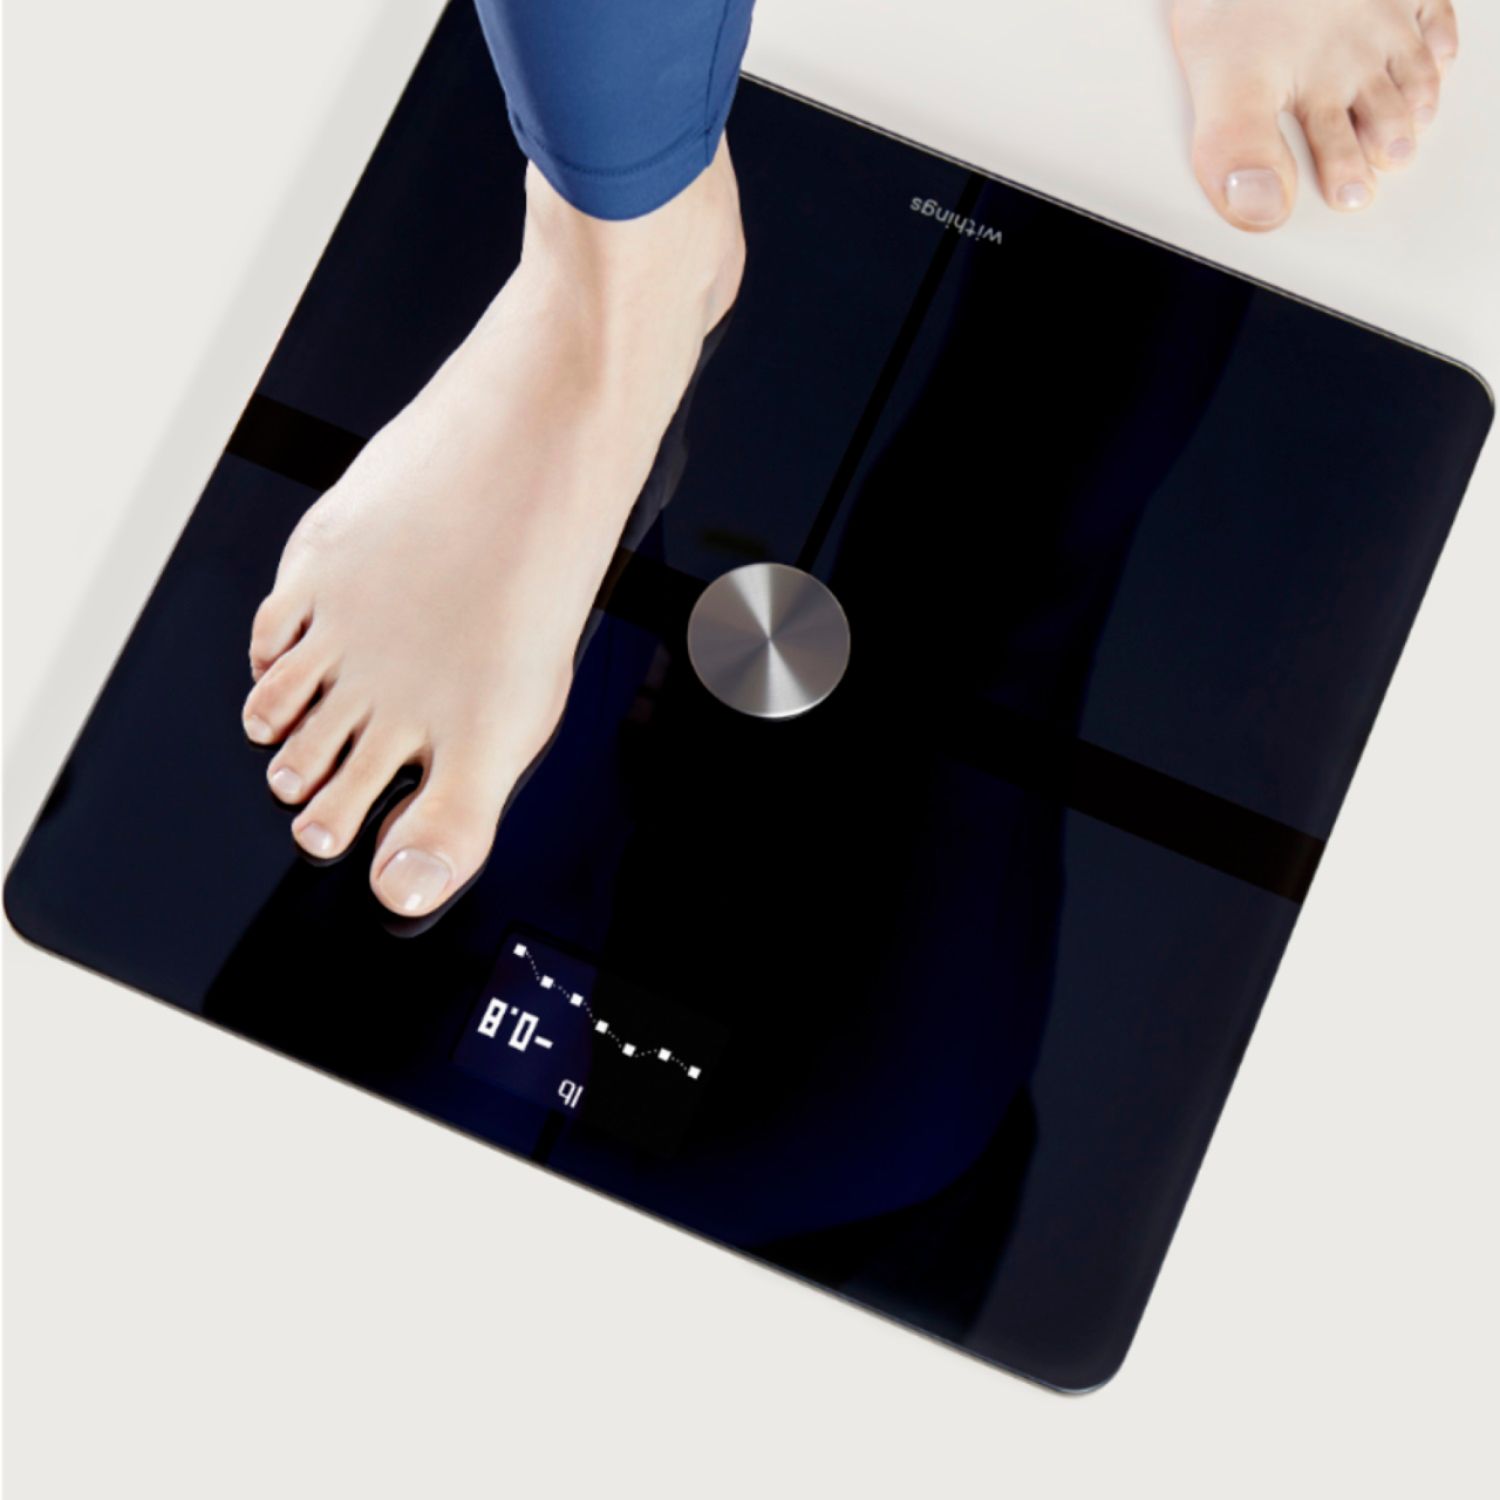 Withings Body Body Composition Smart Wi Fi Scale Black Wbs05